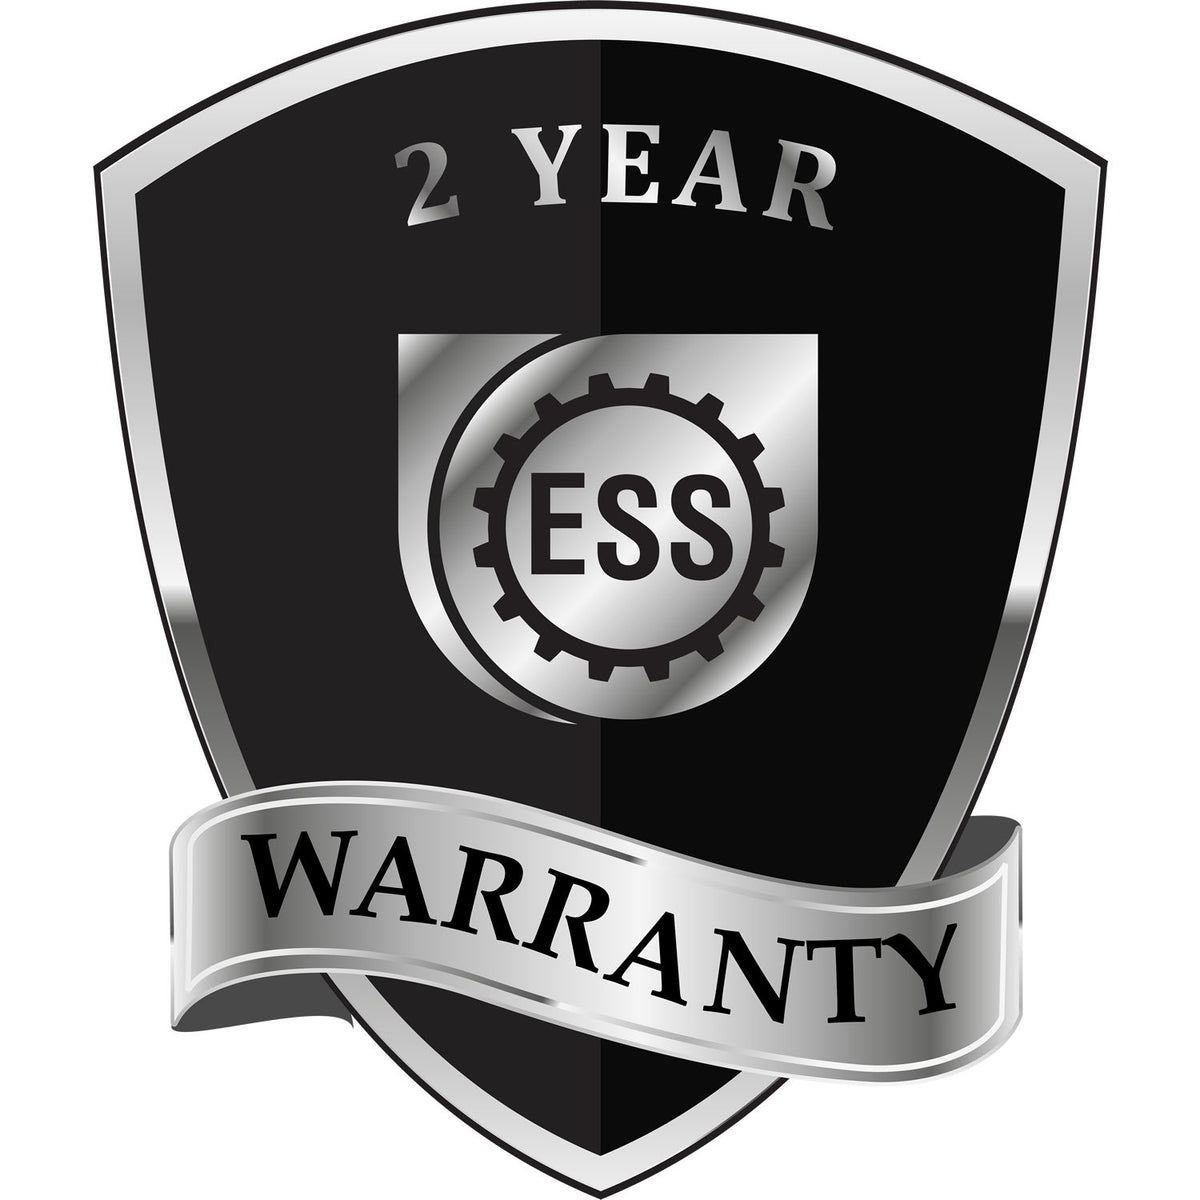 A black and silver badge or emblem showing warranty information for the Heavy Duty Cast Iron Florida Geologist Seal Embosser